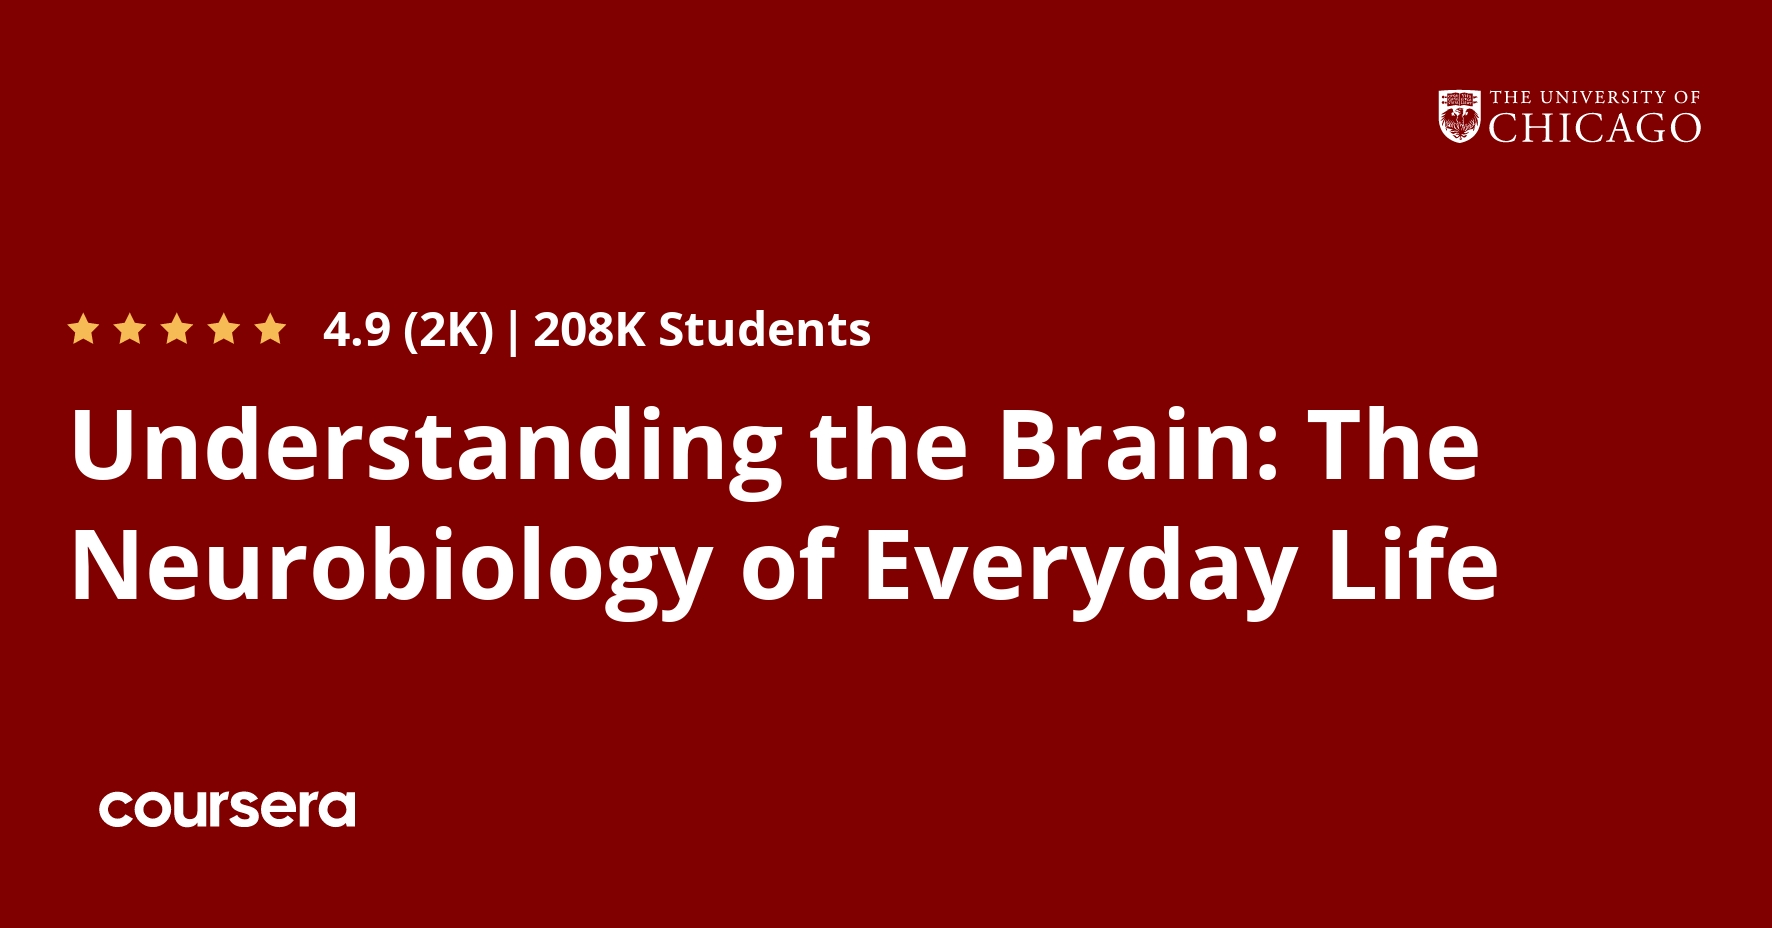 Understanding the Brain: The Neurobiology of Everyday Life